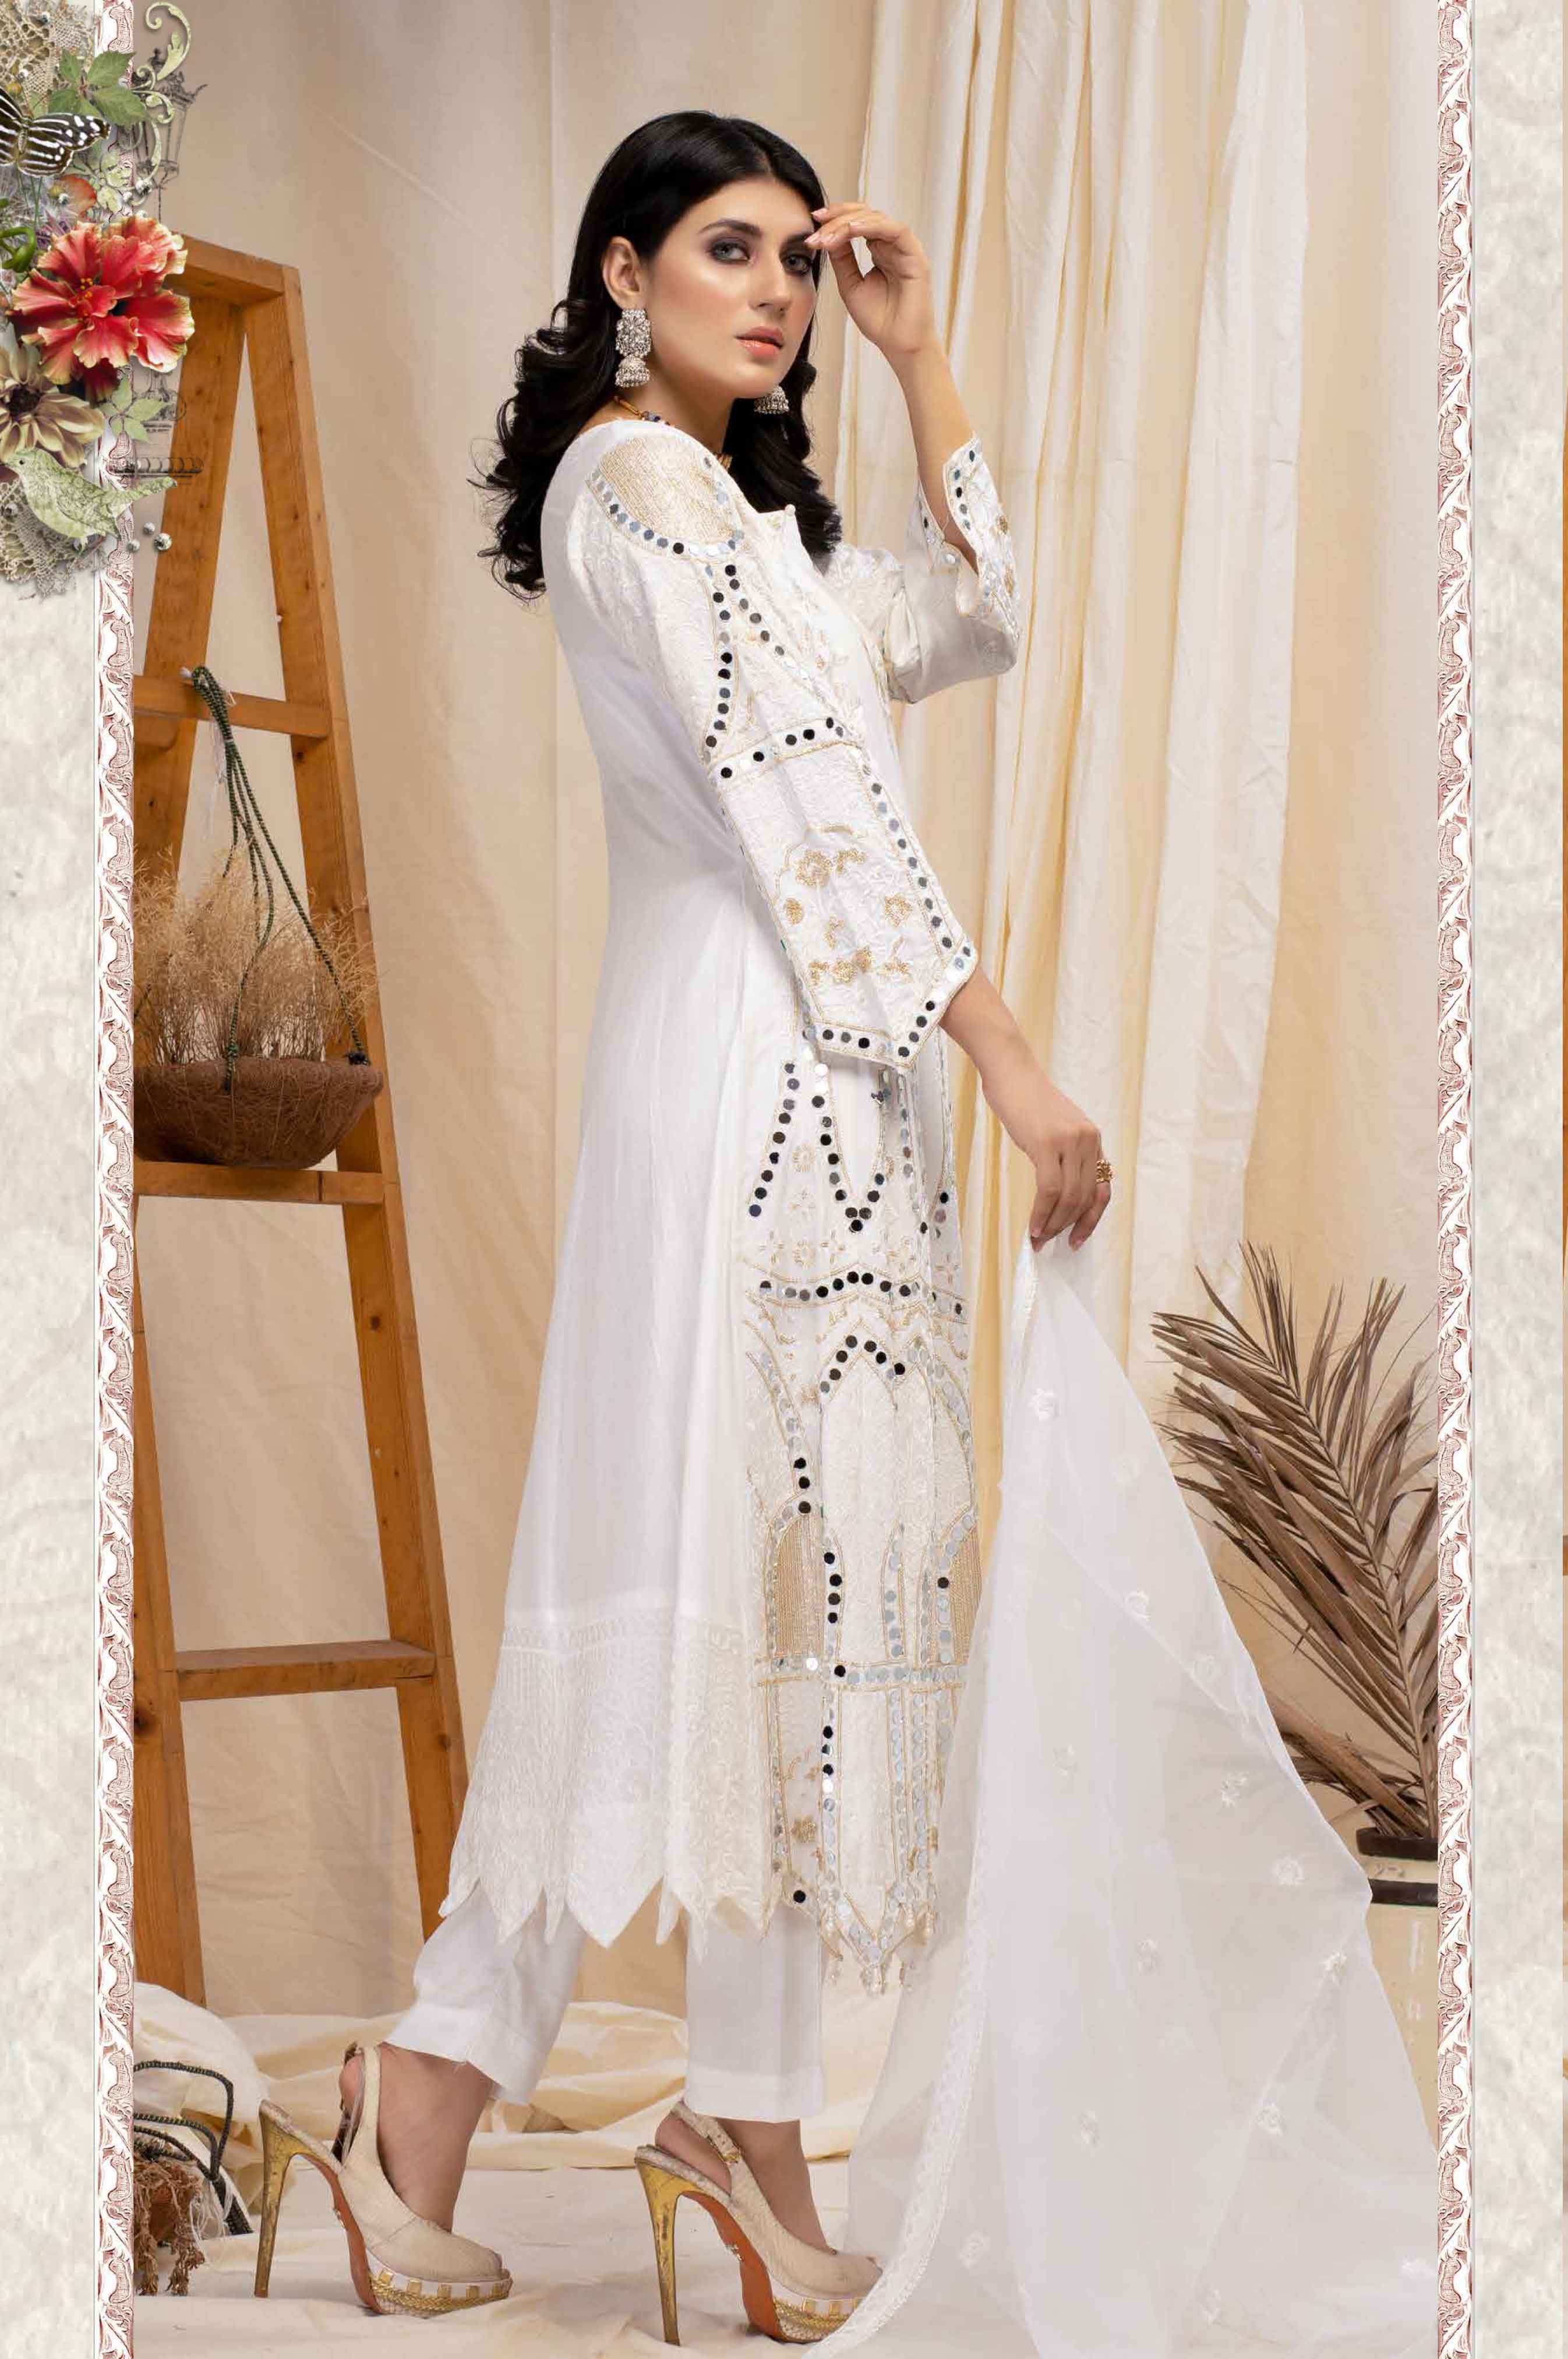 Simrans Mirror Frock White Outfit with Embroidered Net Dupatta DesiP 